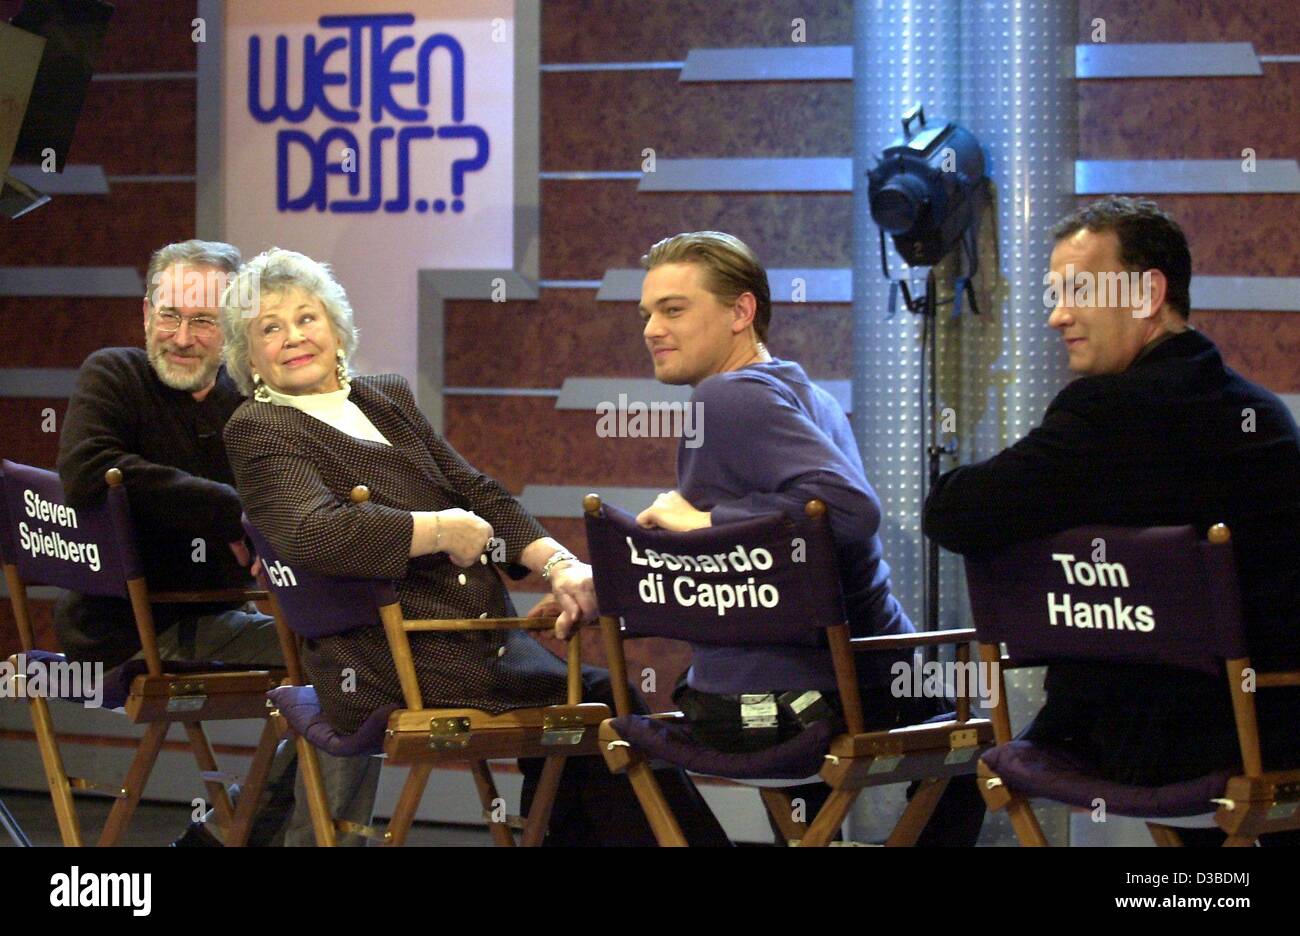 (dpa) - US film director Steven Spielberg (L) and US actors Leonardo DiCaprio (2nd from R) and Tom Hanks (R) pose with Erika, a lady from the audience, in director chairs during the German TV show 'Wetten dass...?' (bet that...?), in Boeblingen, Germany, 25 January 2003. The Hollywood stars promoted Stock Photo